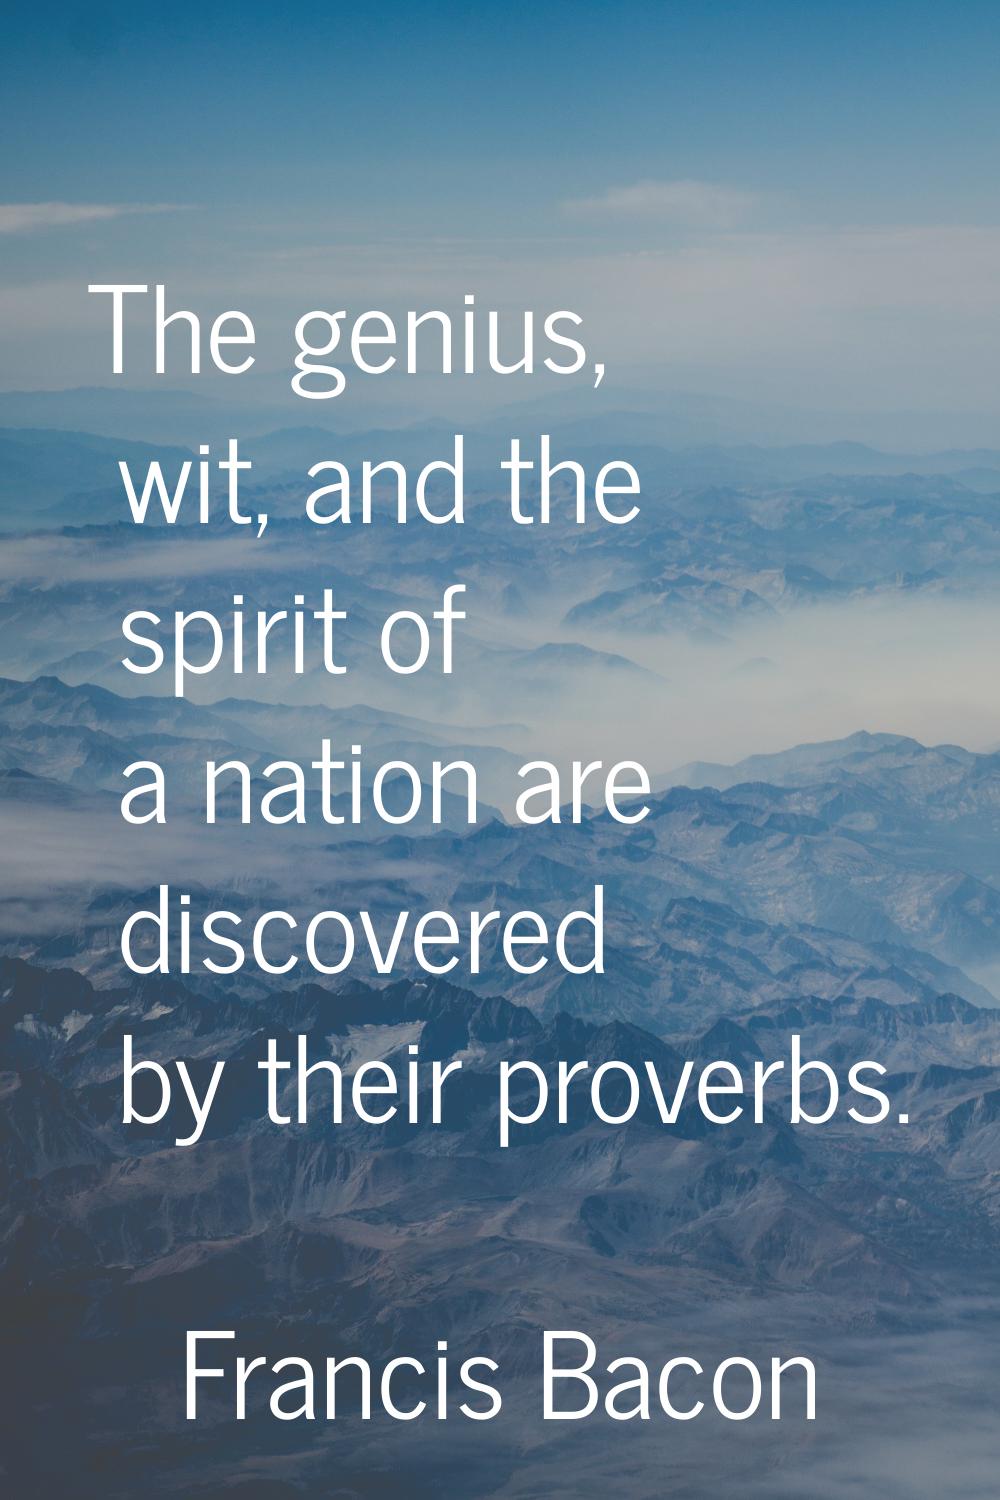 The genius, wit, and the spirit of a nation are discovered by their proverbs.